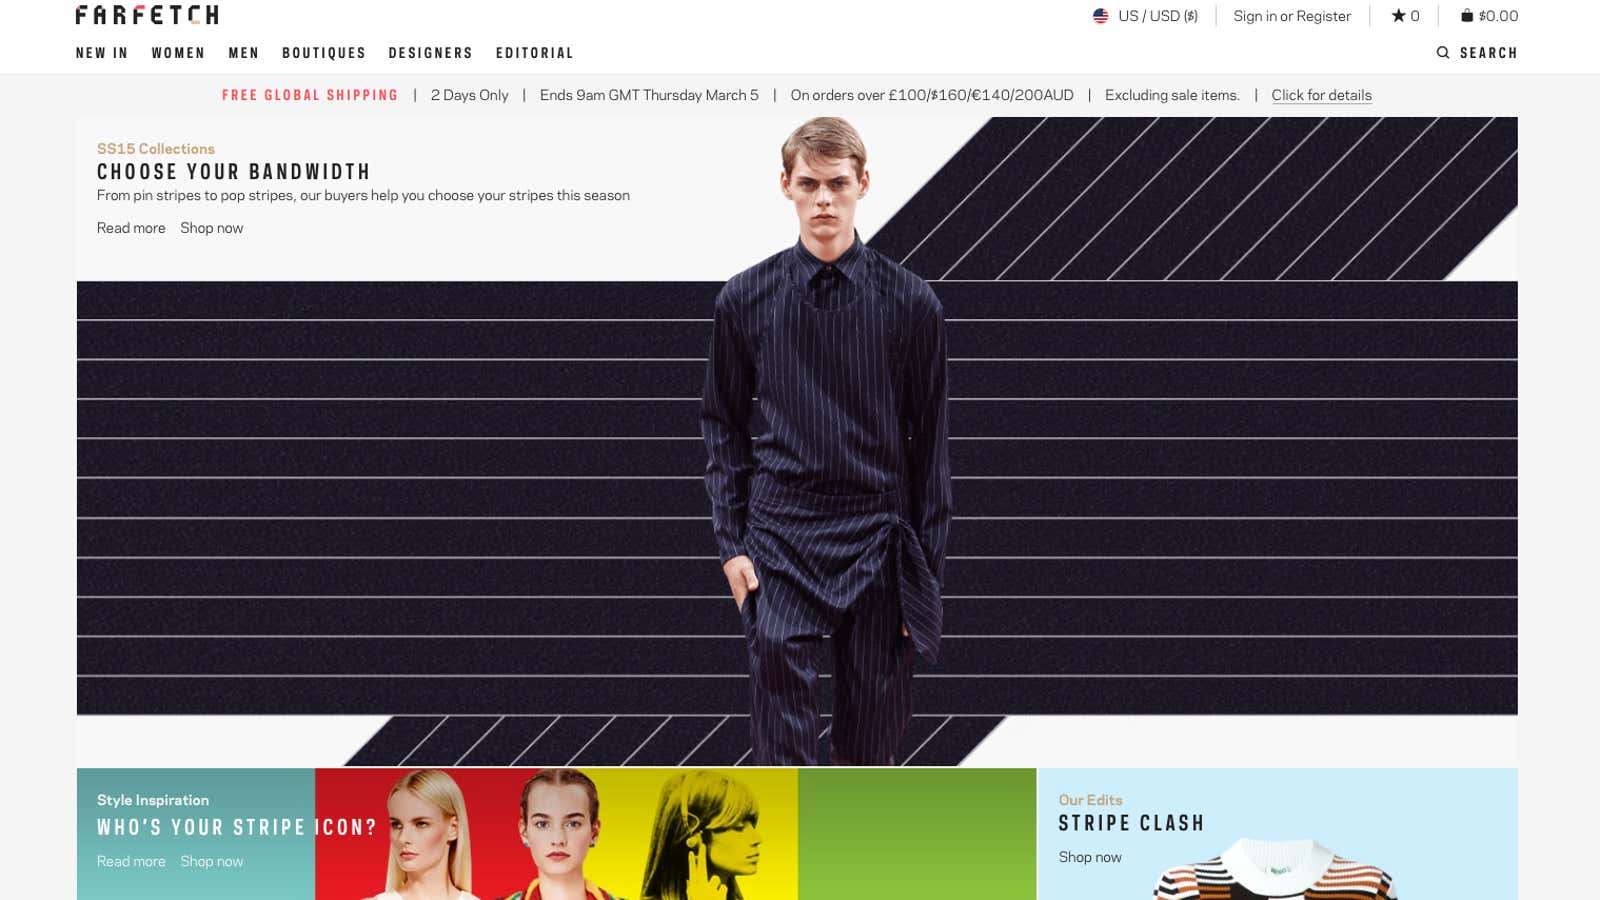 Farfetch lets users shop a global network of brick-and-mortar stores.